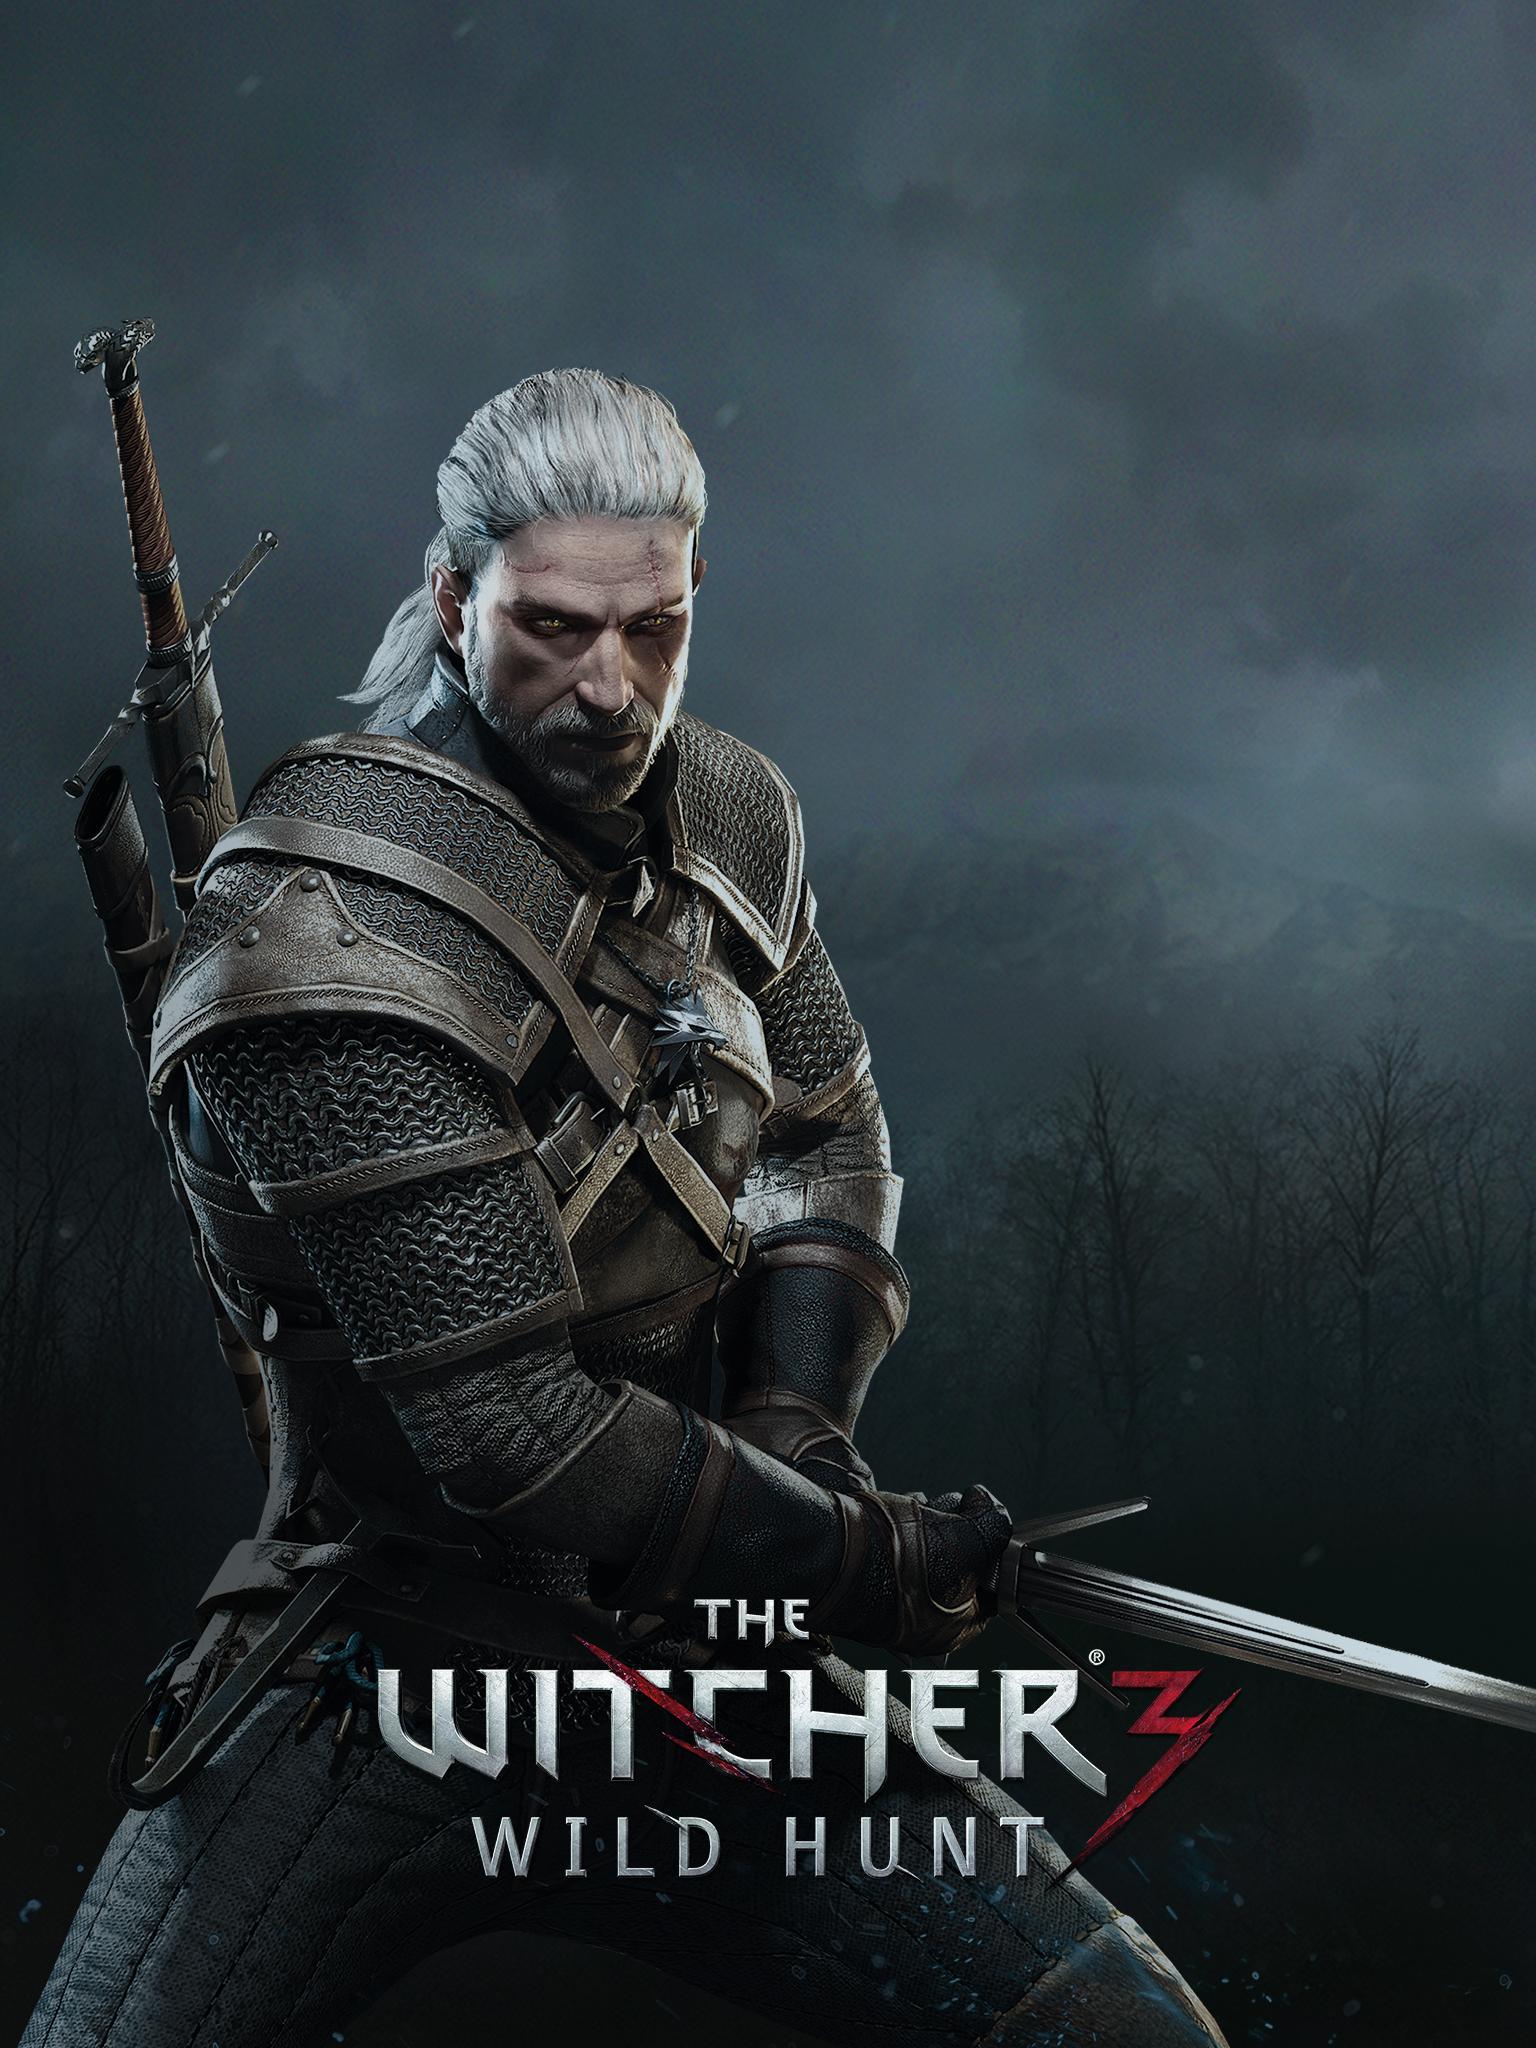 50+] Witcher 3 iPad Wallpapers